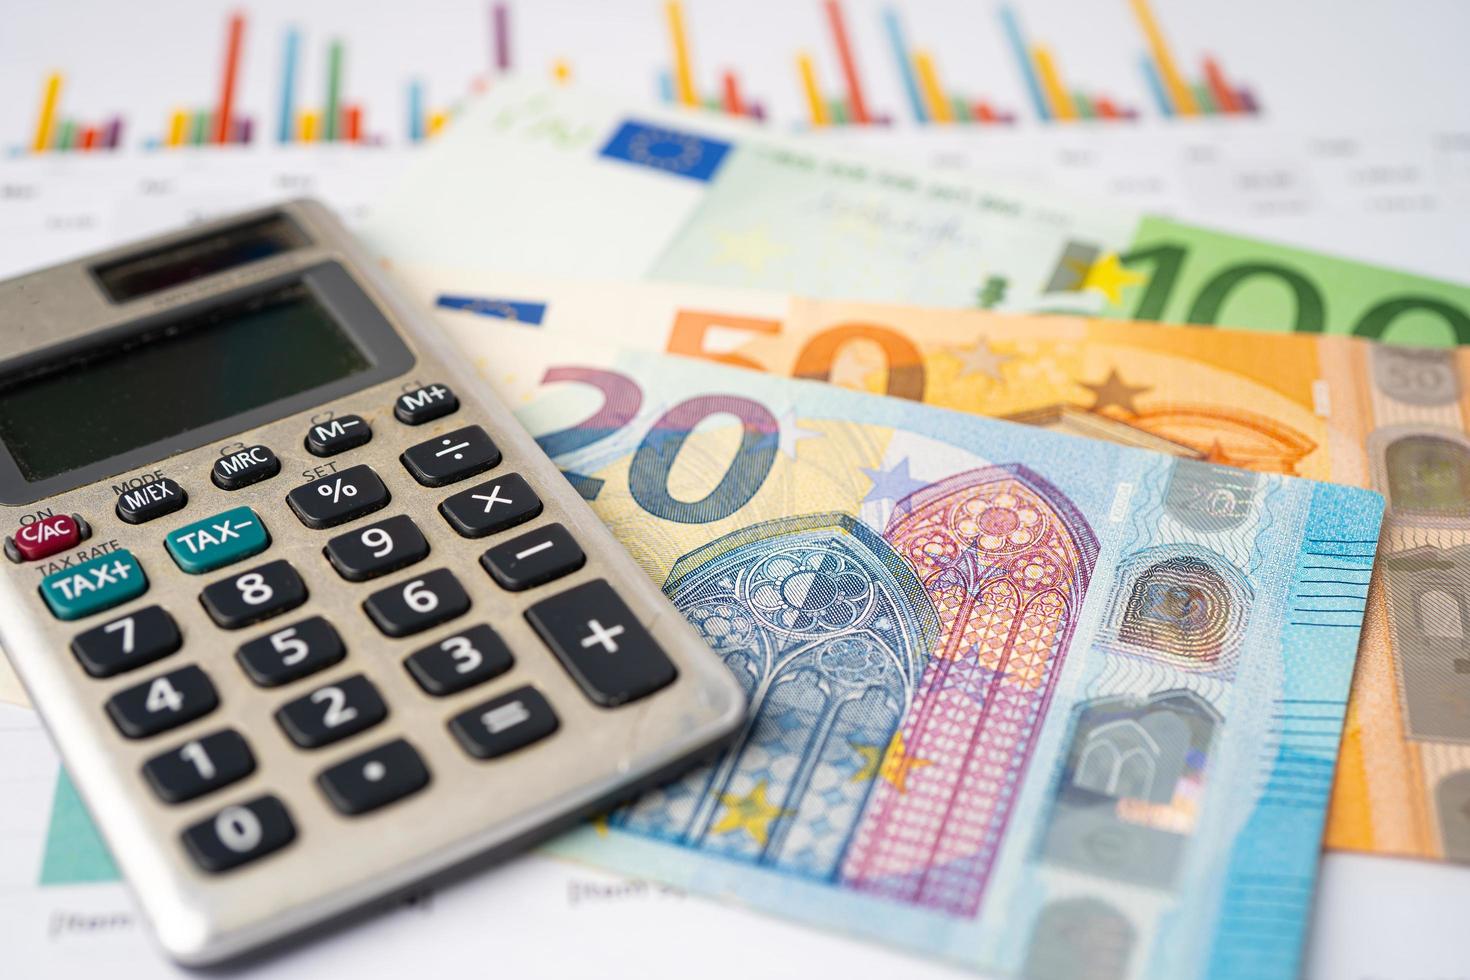 Euro banknotes with calculator, Banking photo